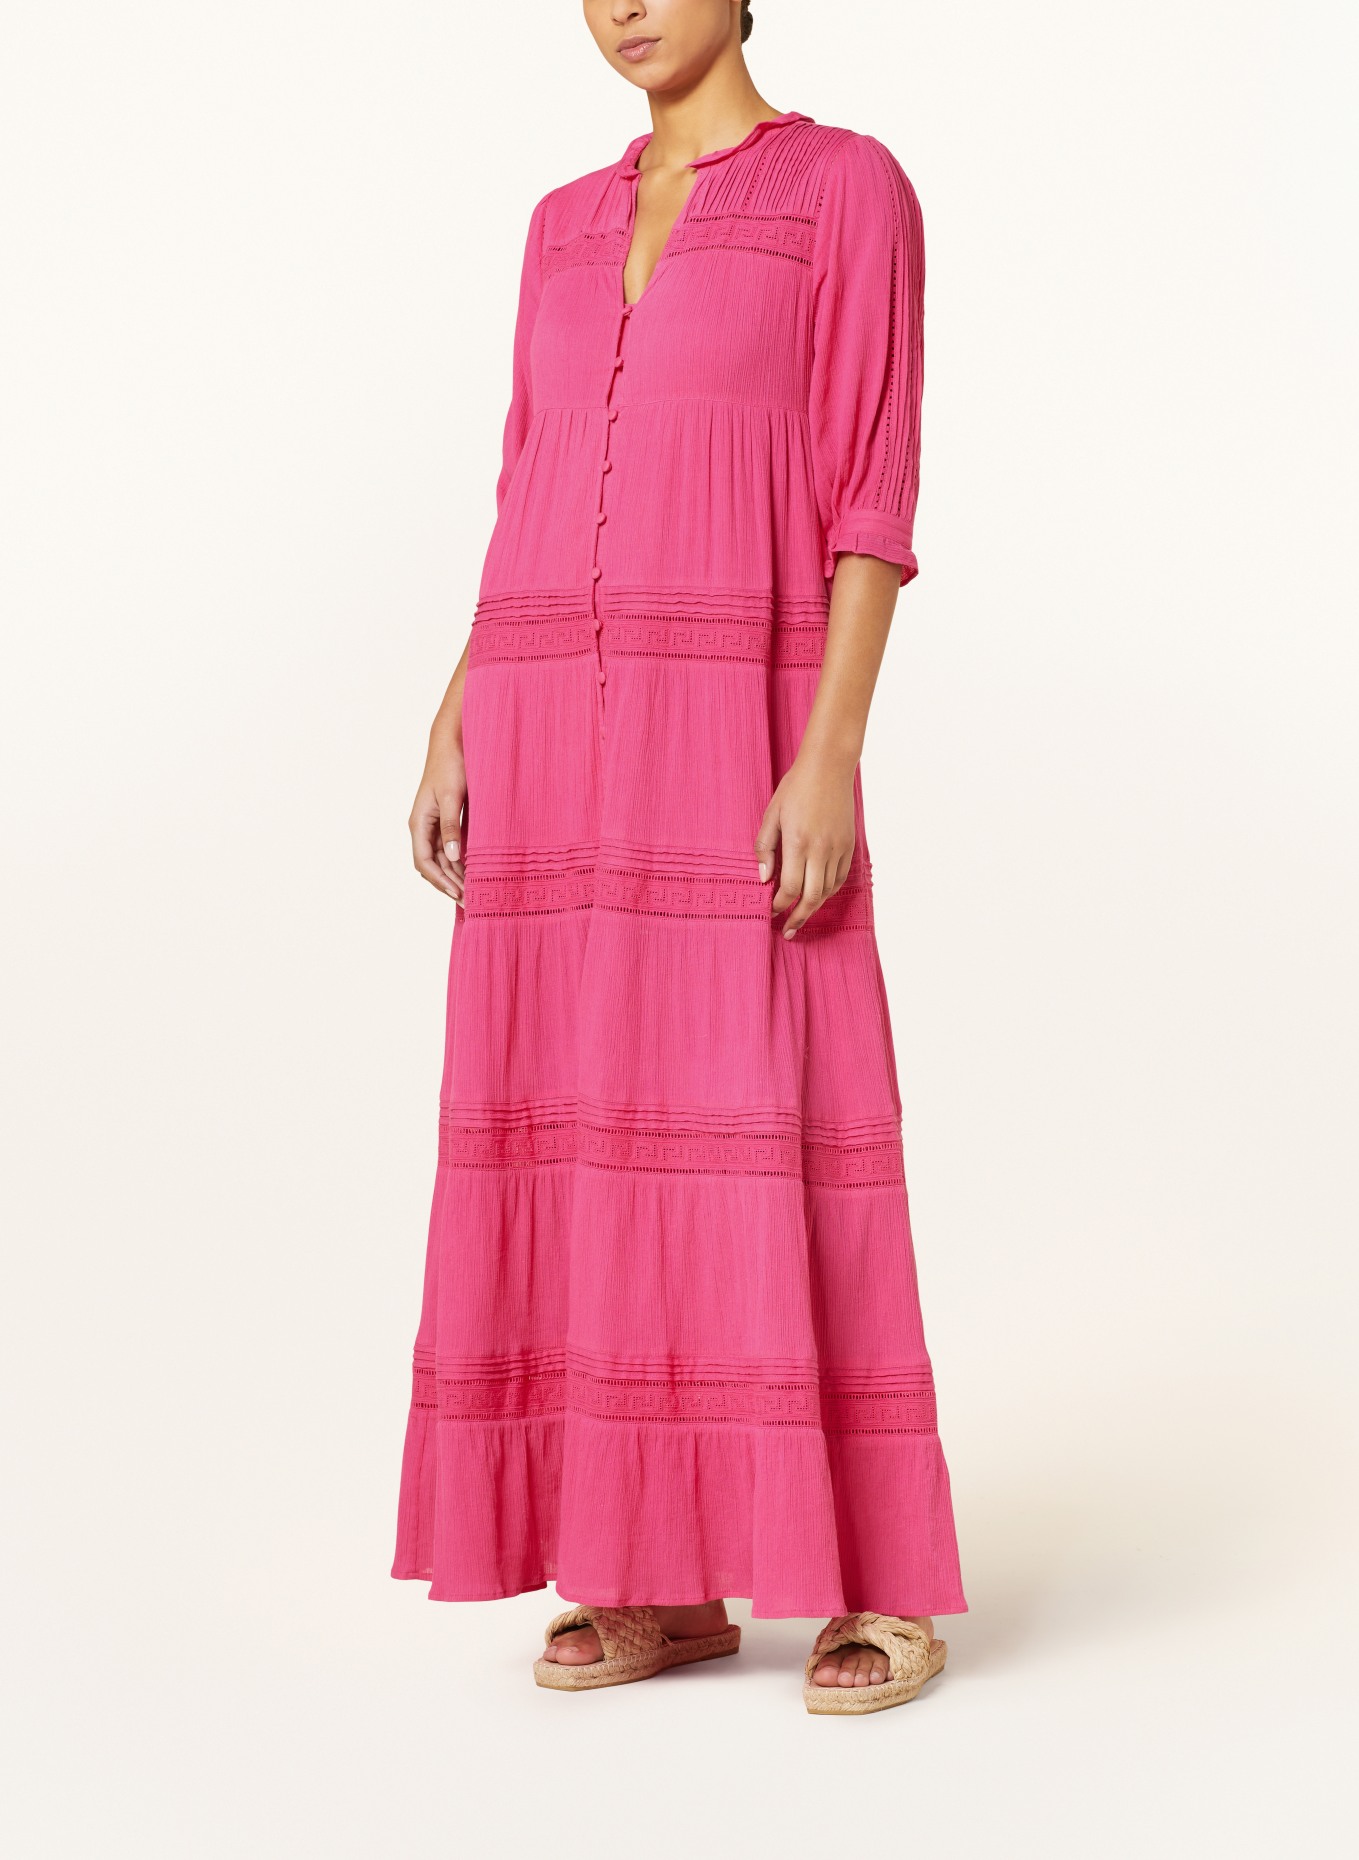 FABIENNE CHAPOT Dress KIRA with 3/4 sleeves, Color: PINK (Image 2)